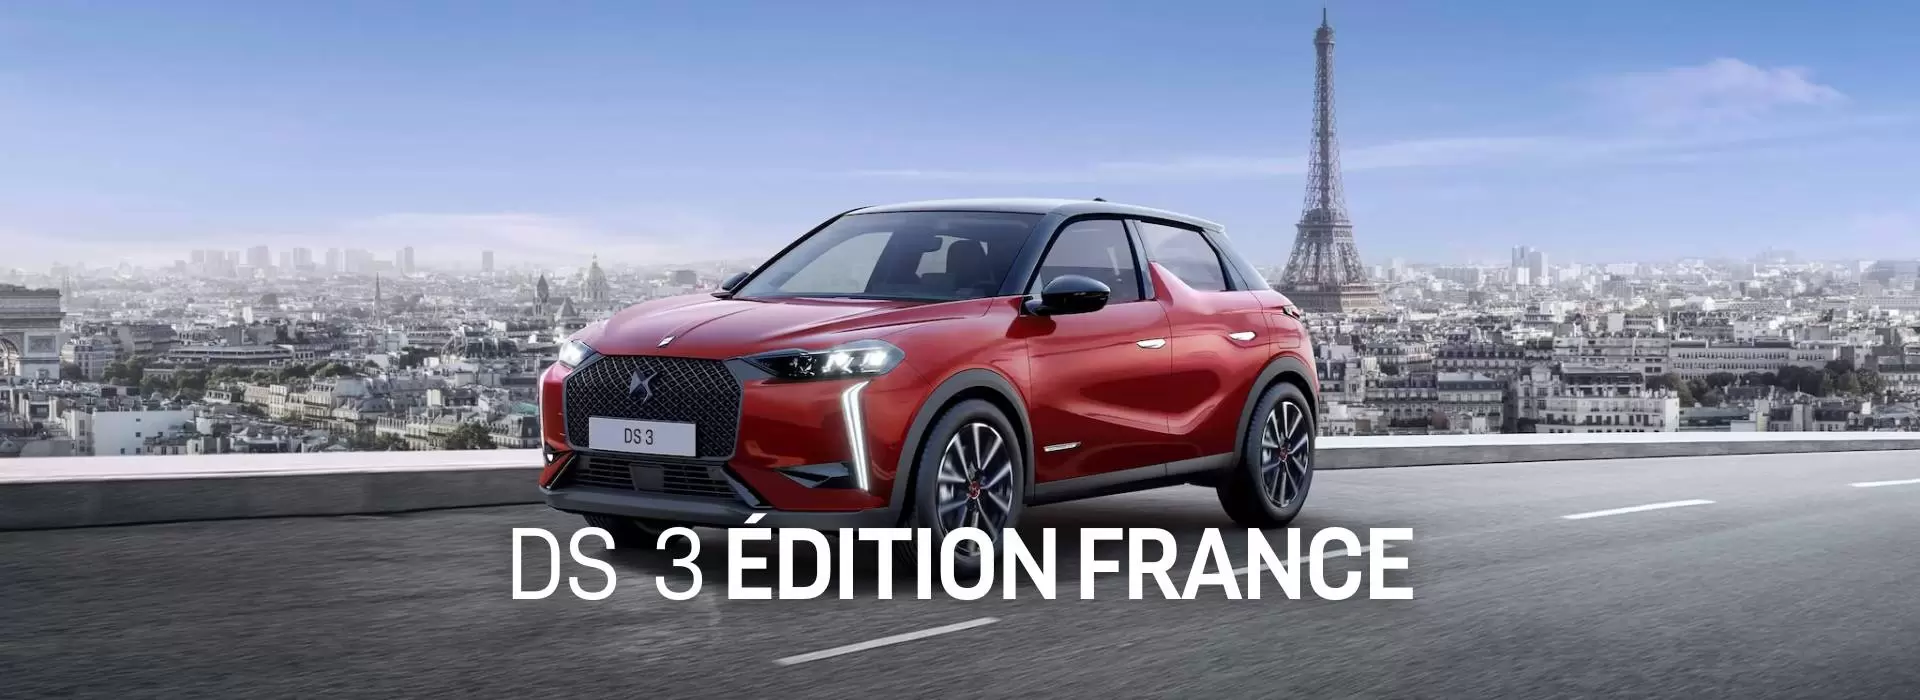 DS3 EDITION FRANCE